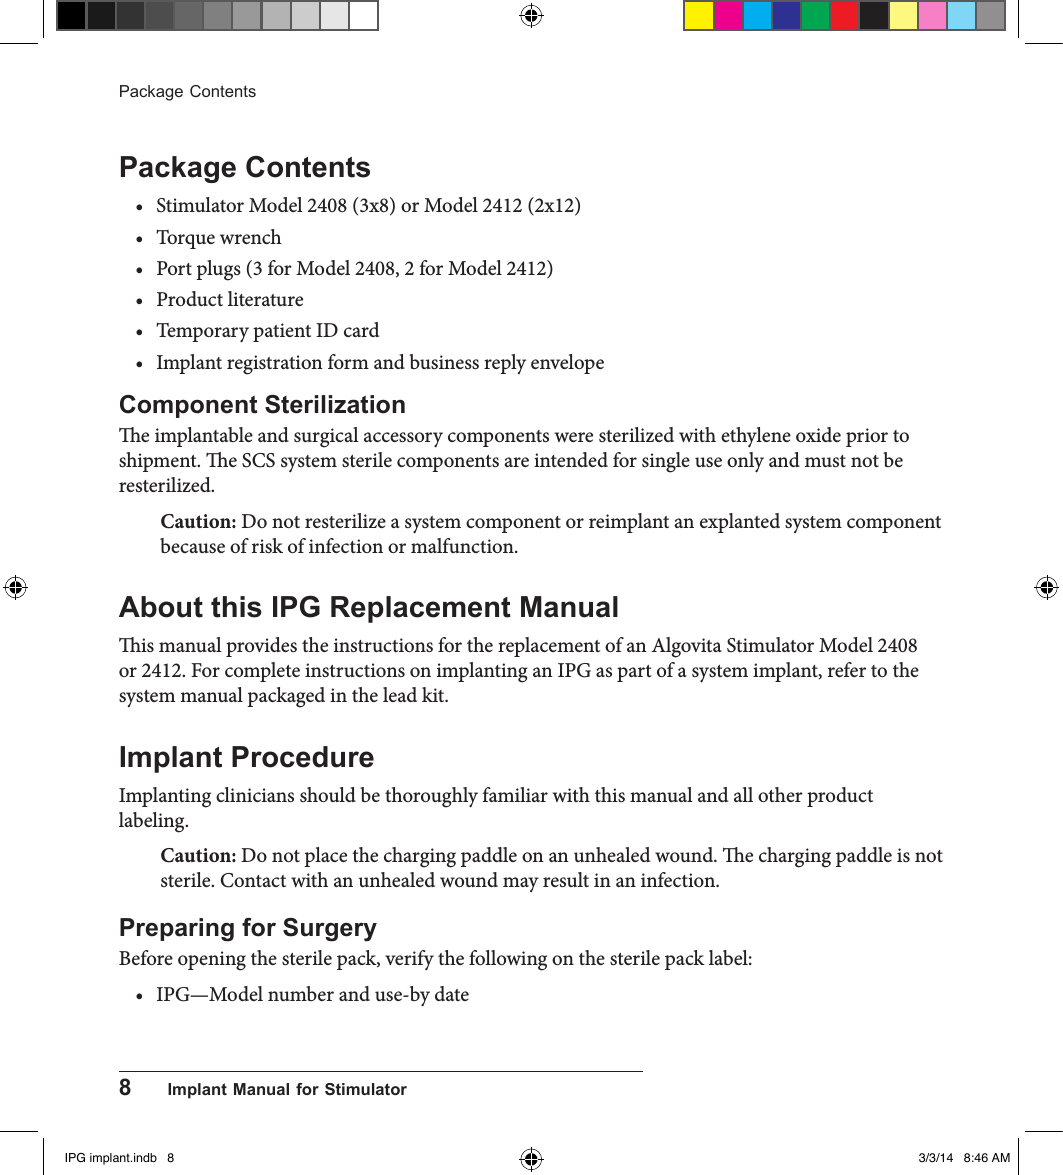 8      Implant Manual for StimulatorPackage ContentsPackage Contents• Stimulator Model 2408 (3x8) or Model 2412 (2x12) • Torque wrench• Port plugs (3 for Model 2408, 2 for Model 2412)• Product literature• Temporary patient ID card• Implant registration form and business reply envelopeComponent Sterilizatione implantable and surgical accessory components were sterilized with ethylene oxide prior to shipment. e SCS system sterile components are intended for single use only and must not be resterilized. Caution: Do not resterilize a system component or reimplant an explanted system component because of risk of infection or malfunction. About this IPG Replacement Manualis manual provides the instructions for the replacement of an Algovita Stimulator Model 2408 or 2412. For complete instructions on implanting an IPG as part of a system implant, refer to the system manual packaged in the lead kit.Implant ProcedureImplanting clinicians should be thoroughly familiar with this manual and all other product labeling.Caution: Do not place the charging paddle on an unhealed wound. e charging paddle is not sterile. Contact with an unhealed wound may result in an infection. Preparing for SurgeryBefore opening the sterile pack, verify the following on the sterile pack label:• IPG—Model number and use-by dateIPG implant.indb   8 3/3/14   8:46 AM